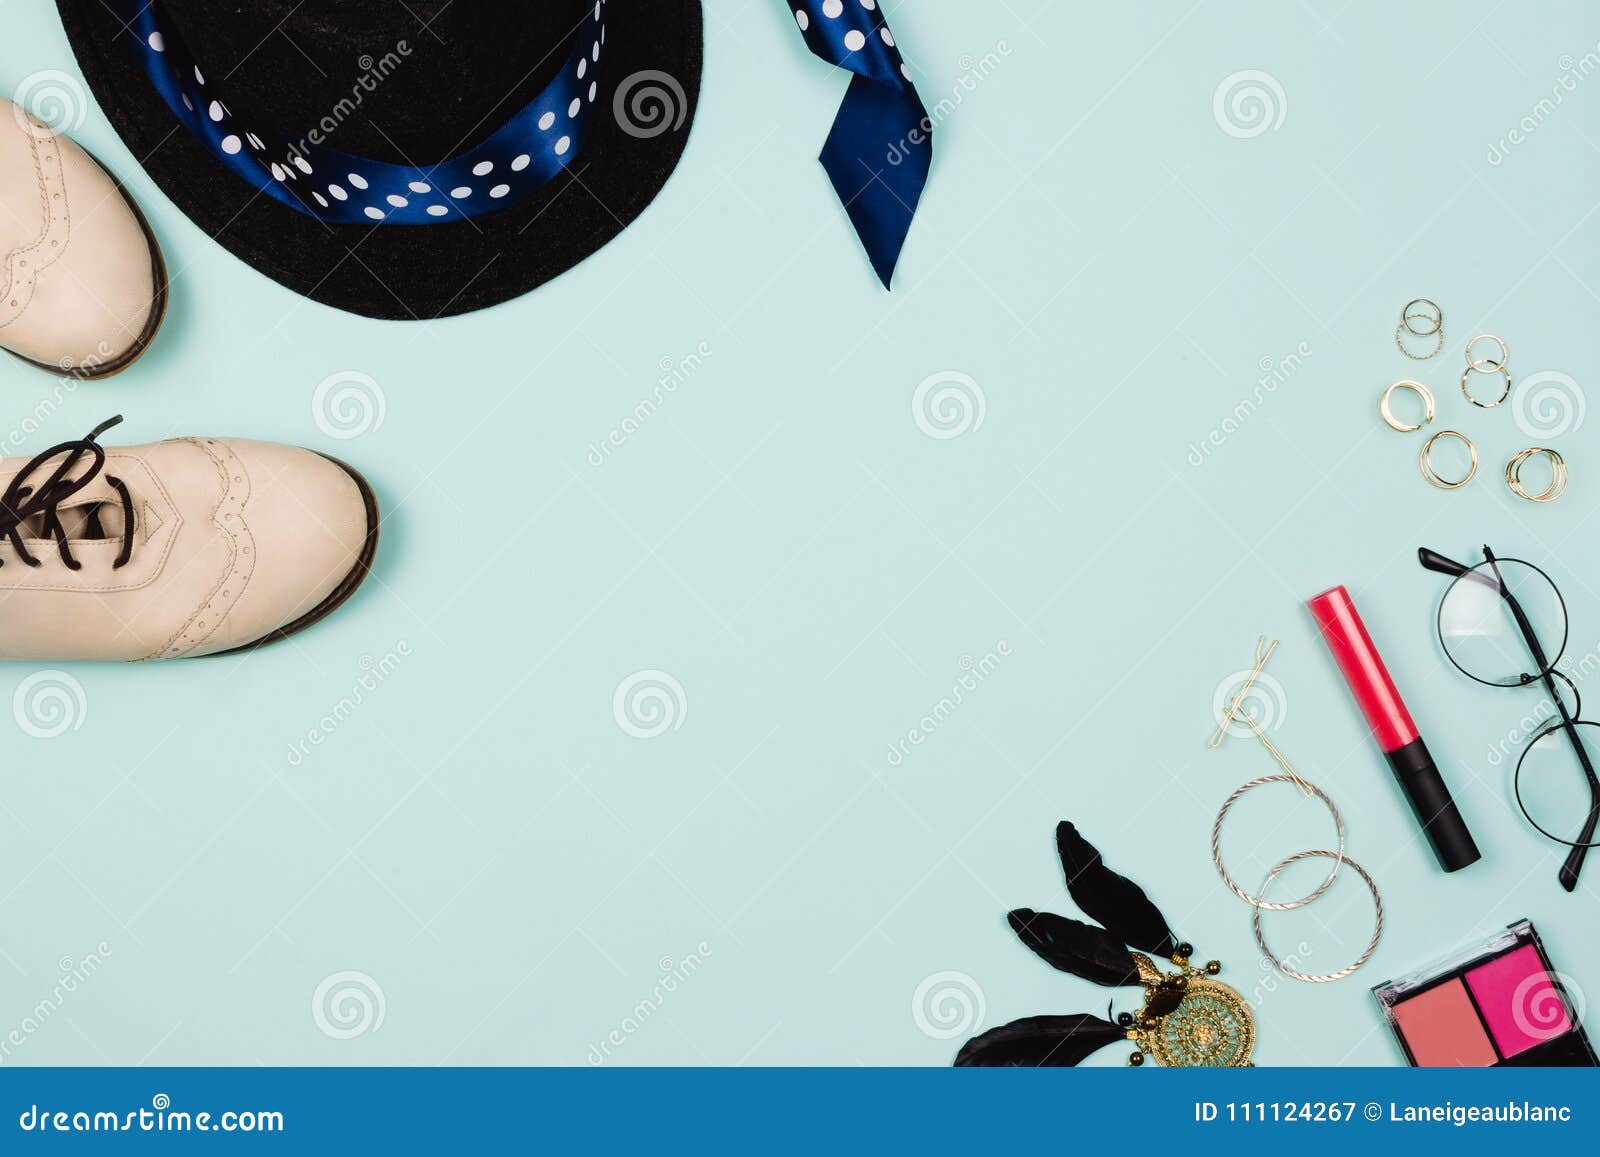 Beautiful Fashion Flatlay Arrangement With Various Fashion Accessories ...